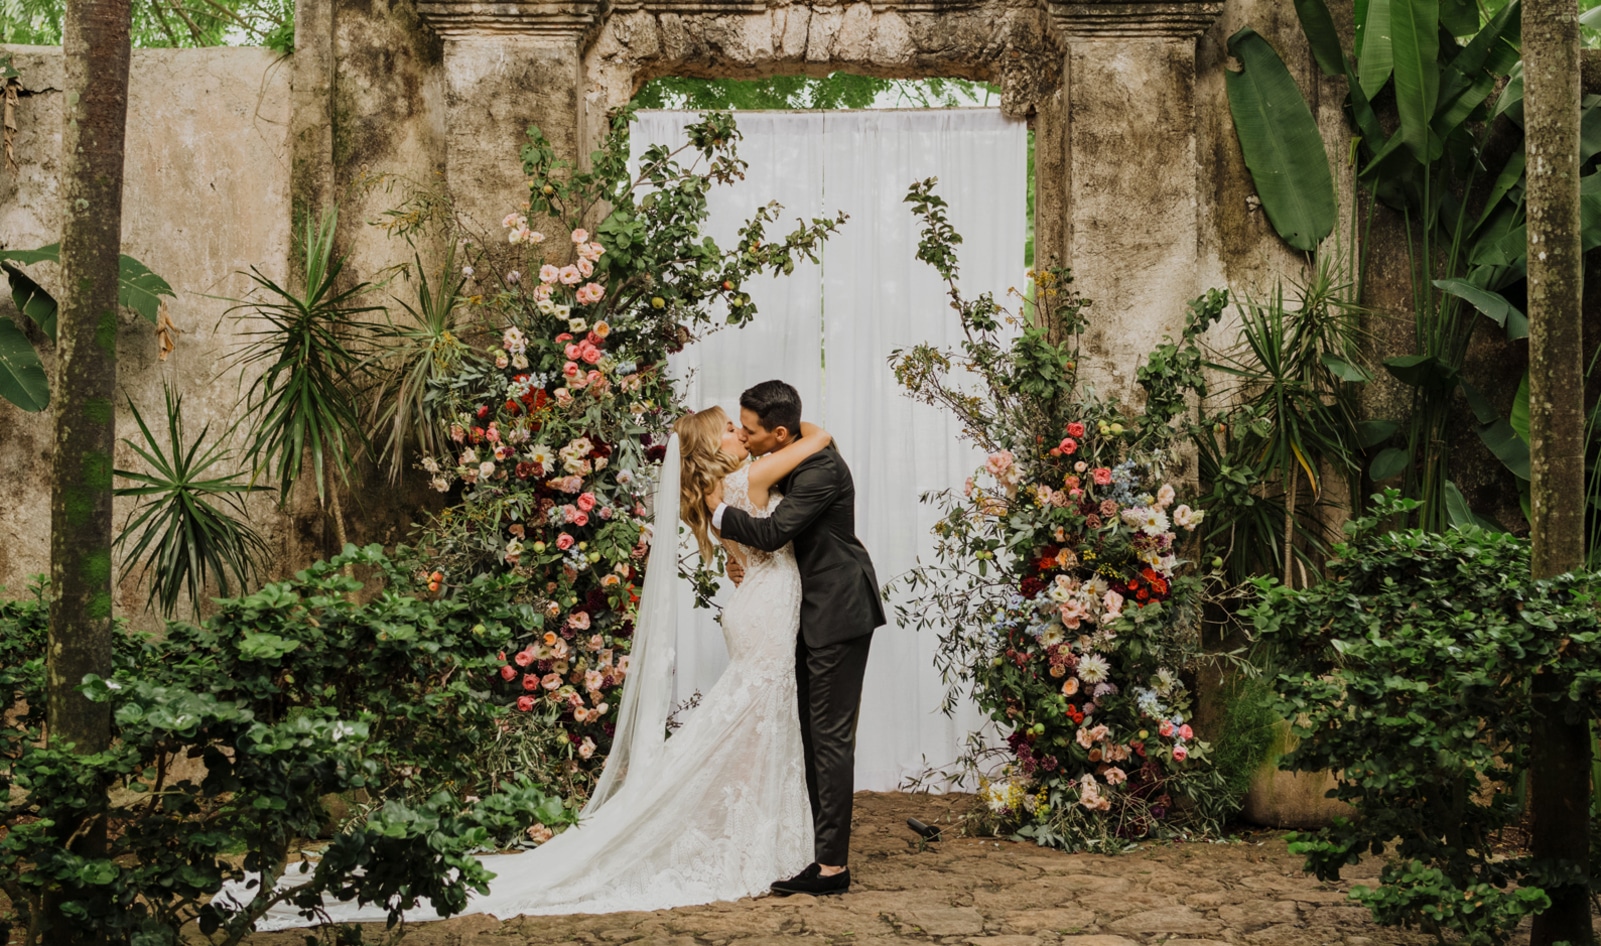 This Influencer's Vegan Yucatán Wedding Was a Celebration of Color, Love, and Mexico's Natural Beauty